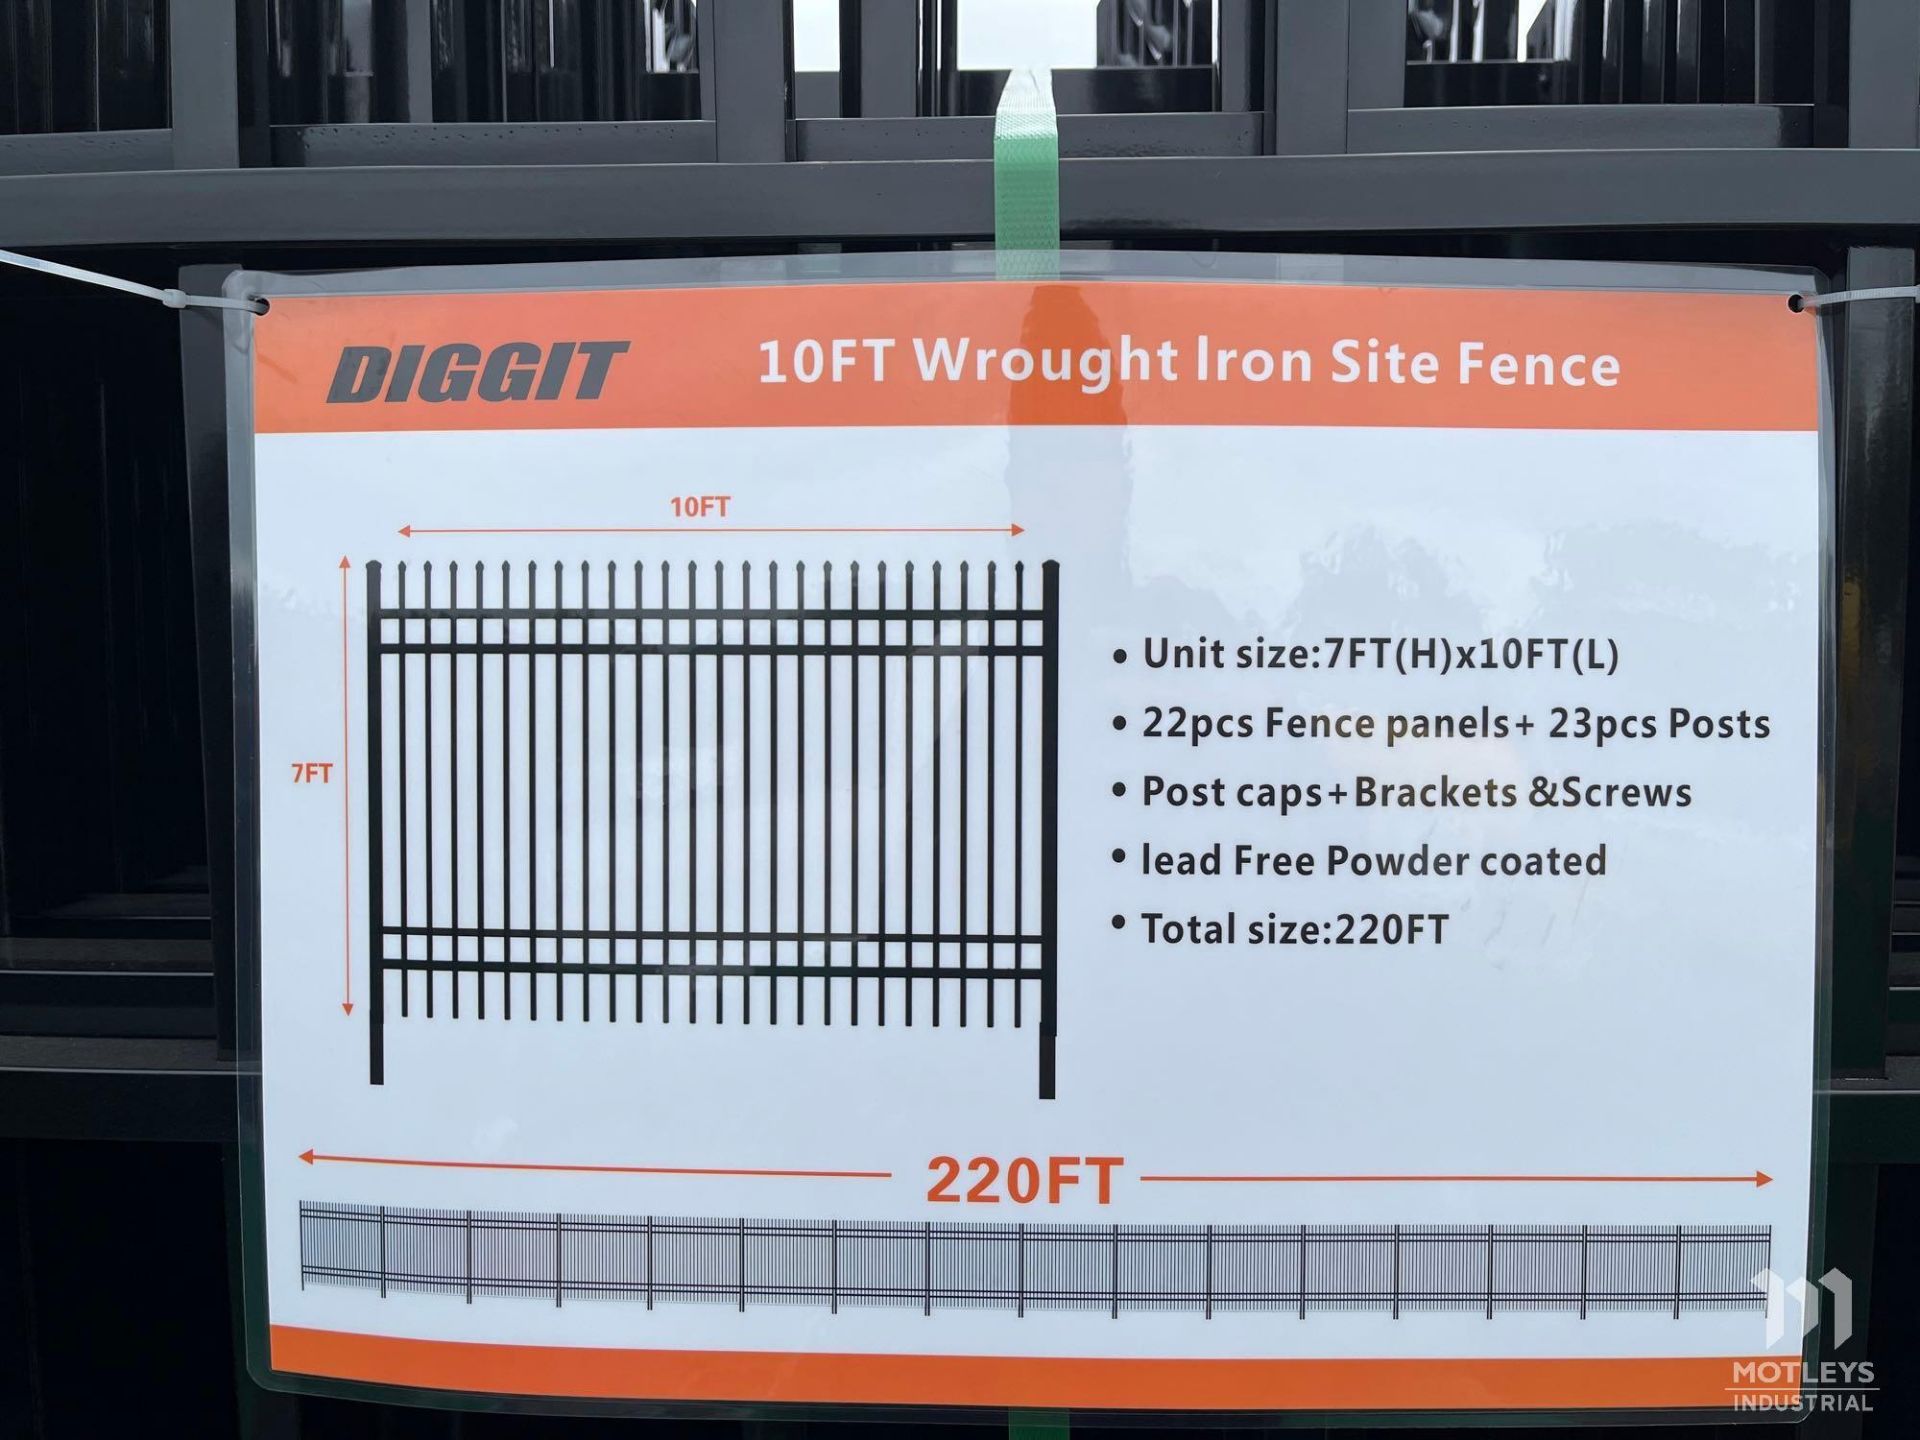 Diggit F10 Wrought Iron Fencing - Image 6 of 7